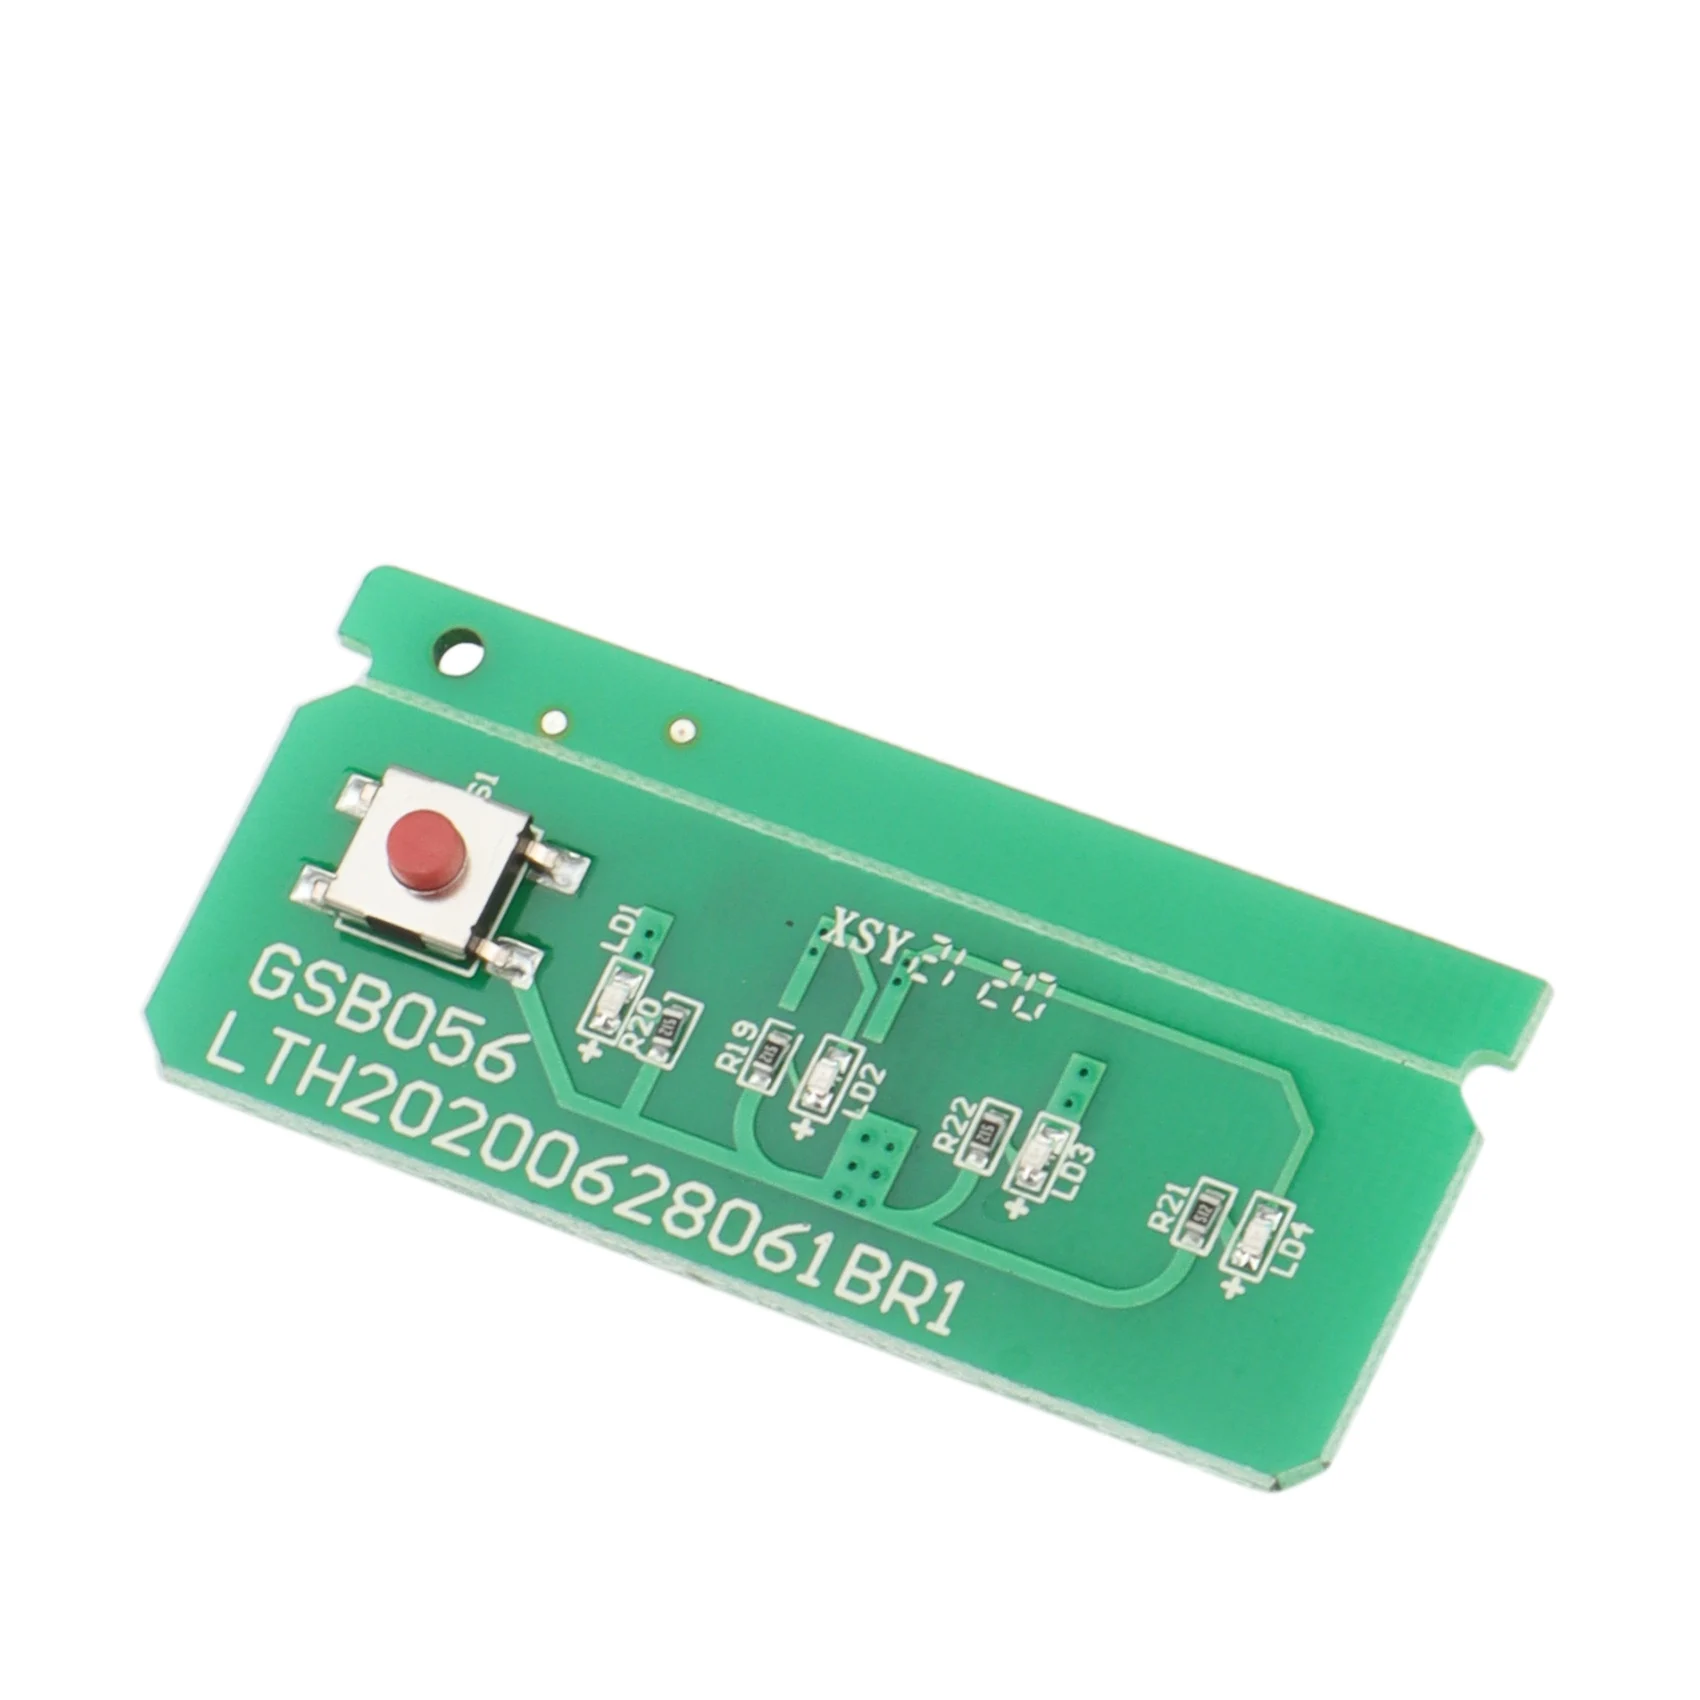 Li-Ion Battery Charging Protection Circuit Board PCB for Greenworks 40V Lithium Battery Lawn Mower Cropper Grass Cutter